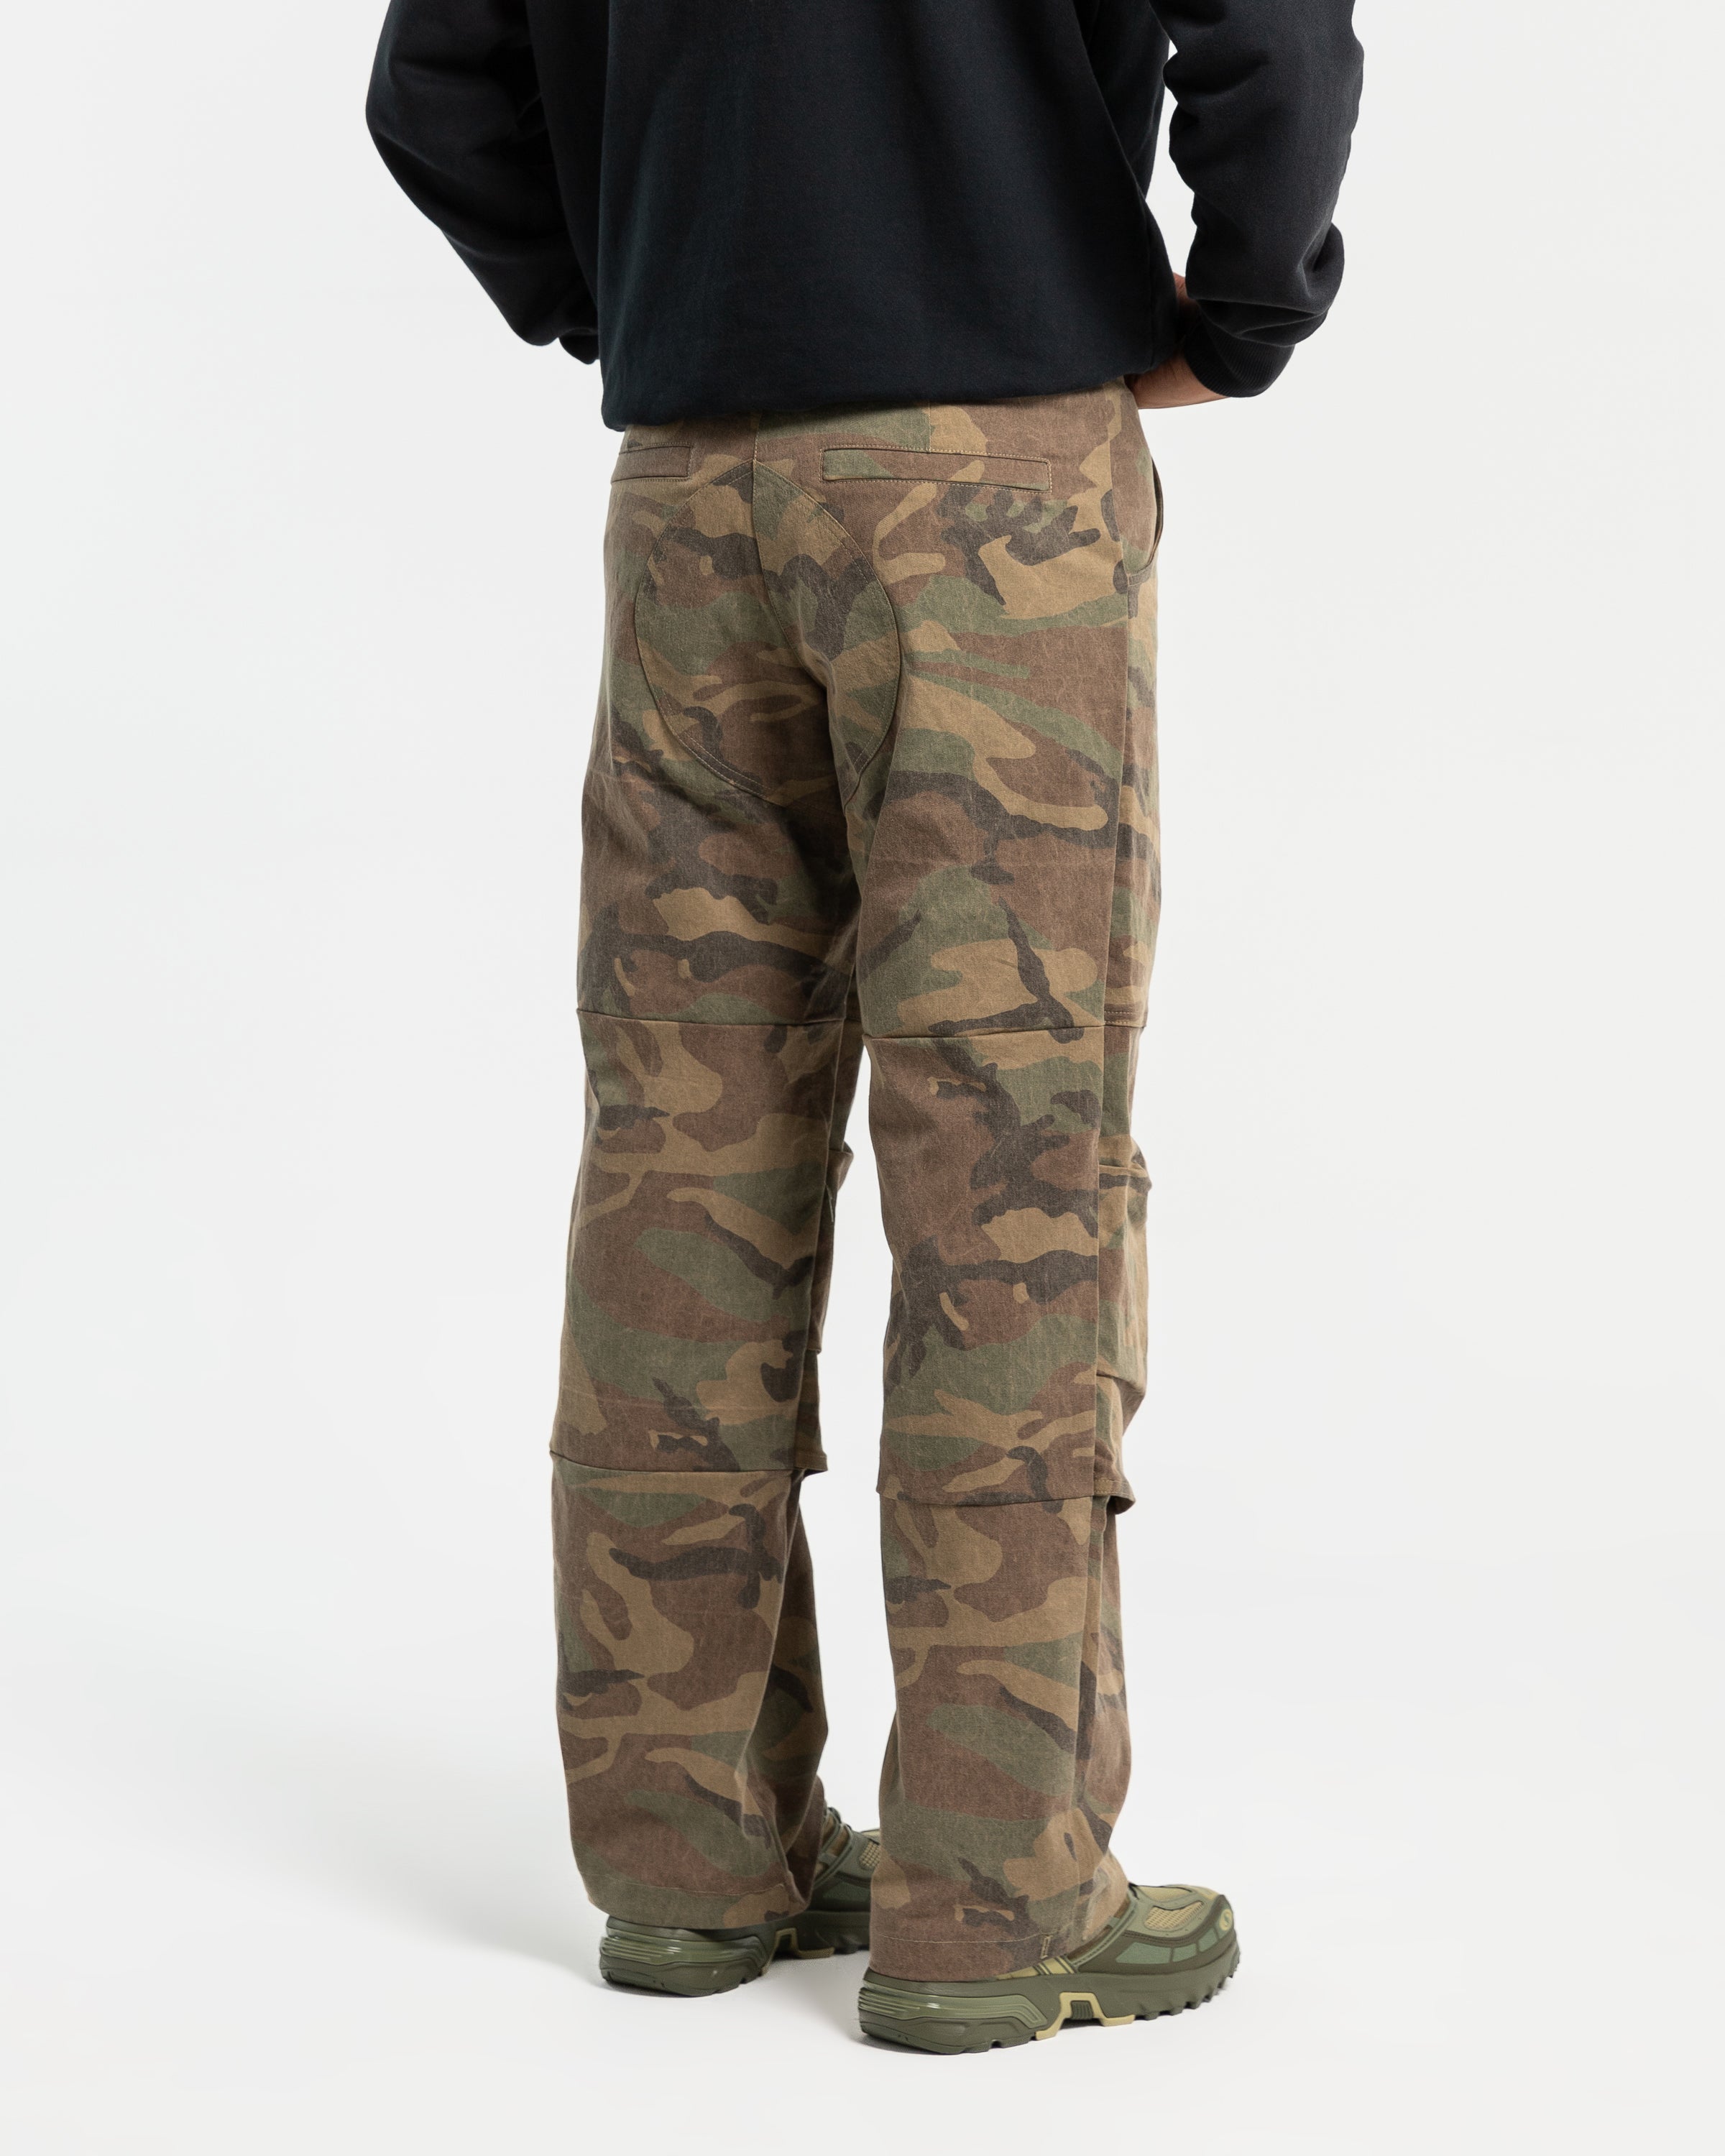 Team Pant Vintage Selvedge in Military Camo